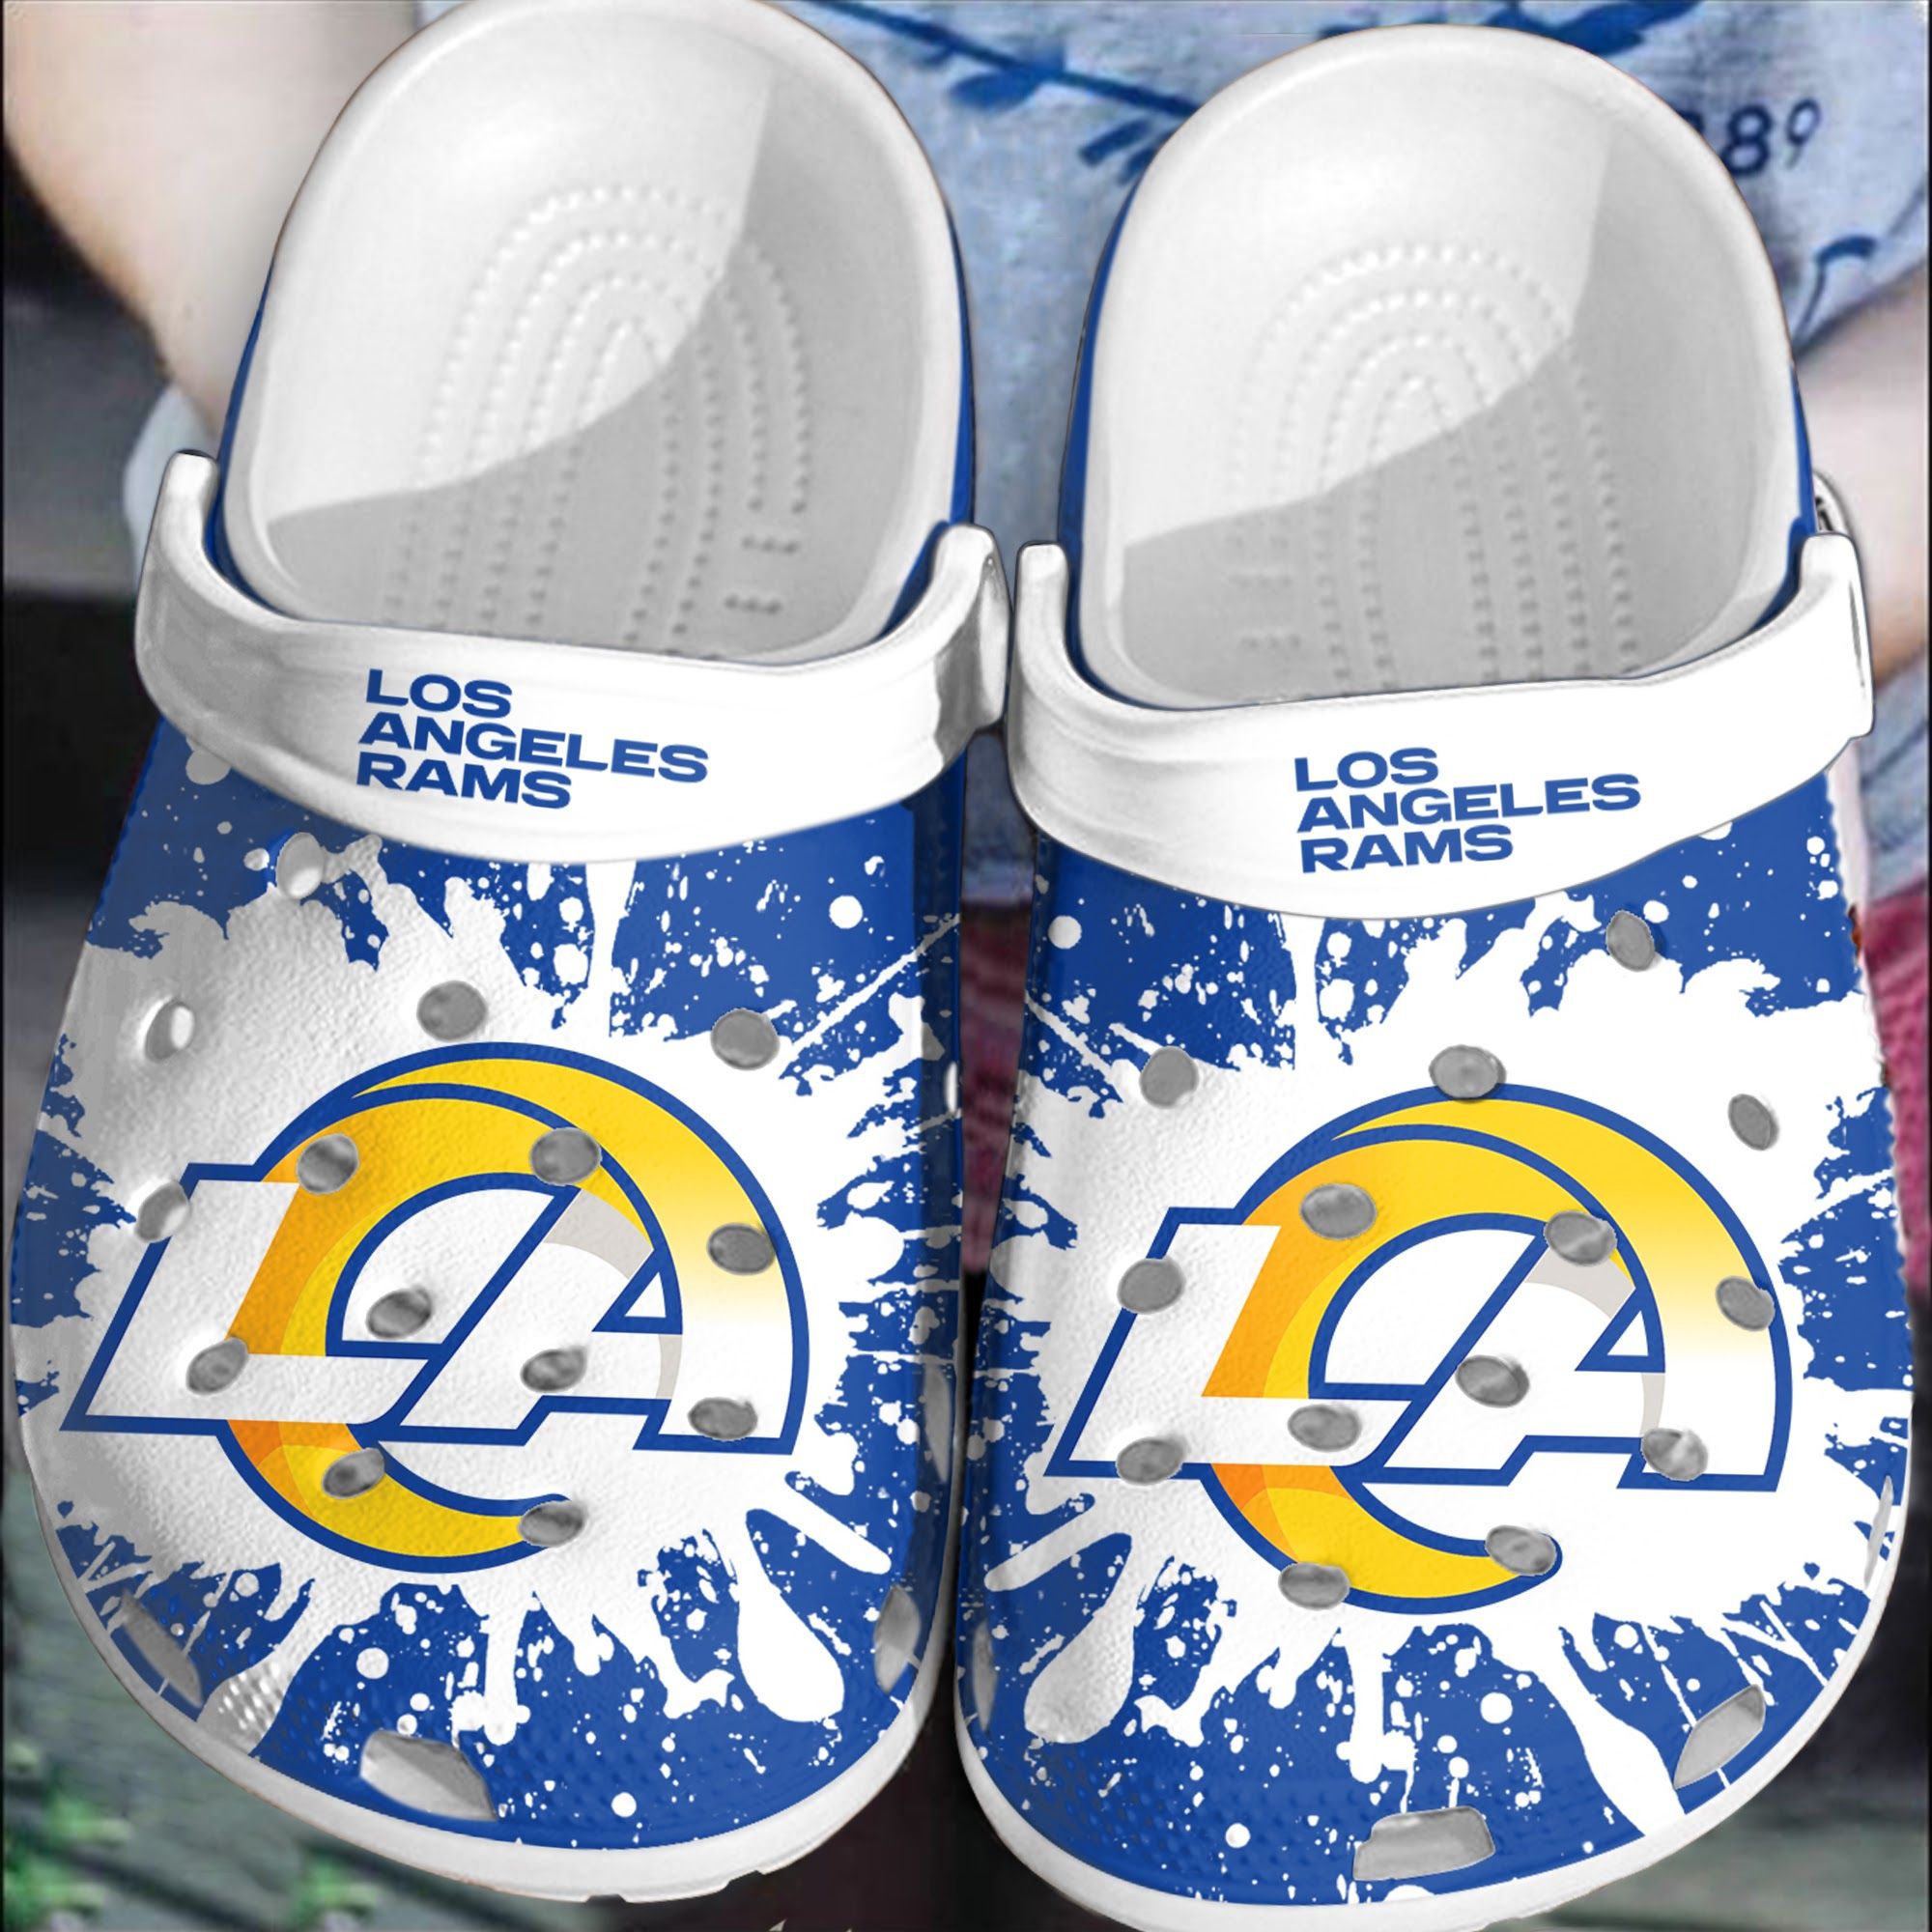 If you'd like to purchase a pair of Crocband Clogs, be sure to check out the official website. 21